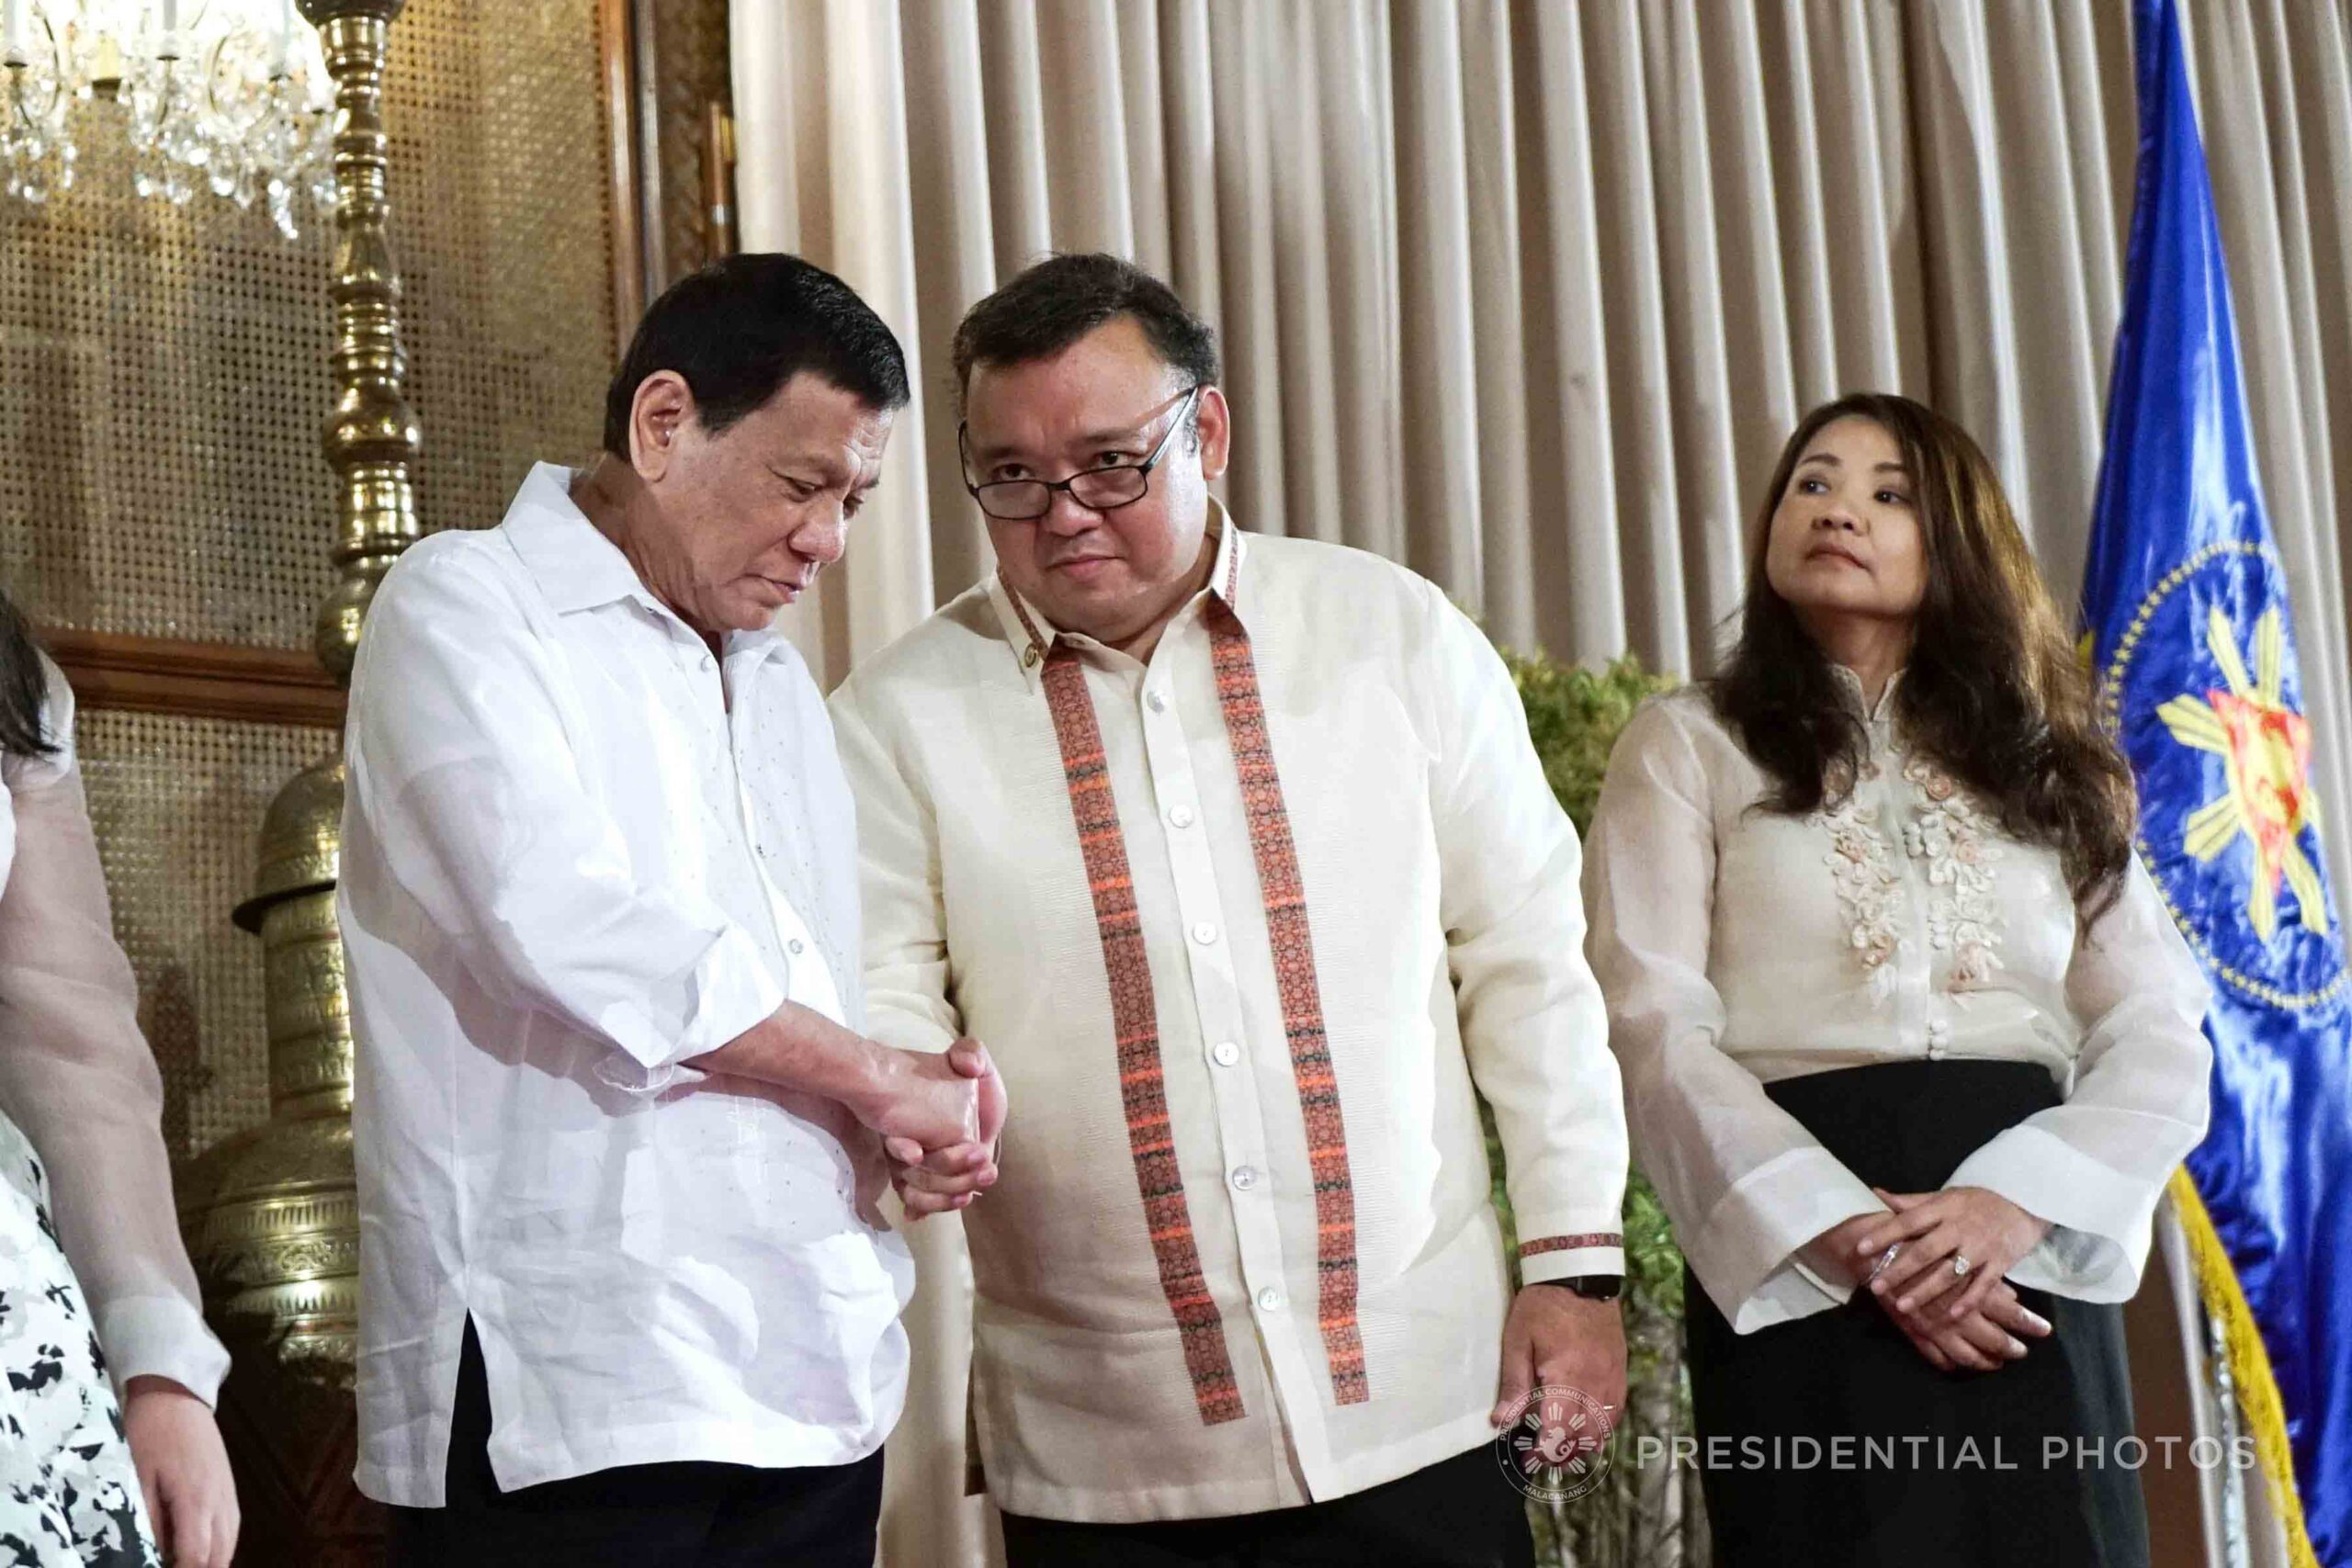 Roque says he respects rights of media, Duterte defenders